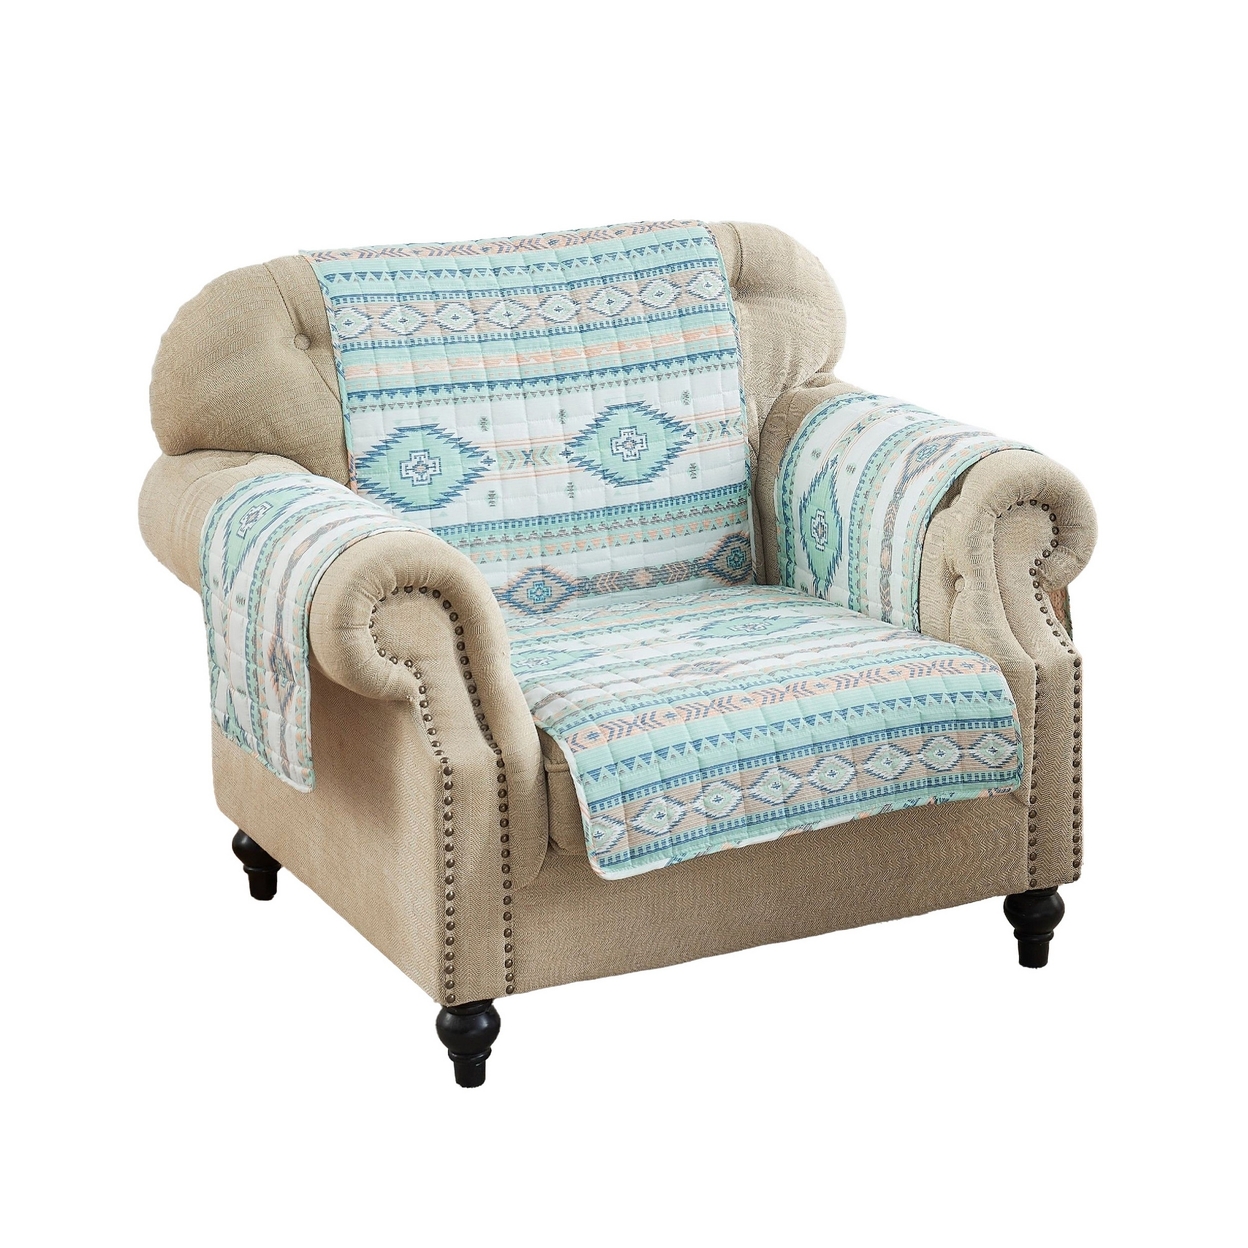 Linda 81 Inch Quilted Armchair Cover, Geometric Prints, Turquoise Polyester-Saltoro Sherpi